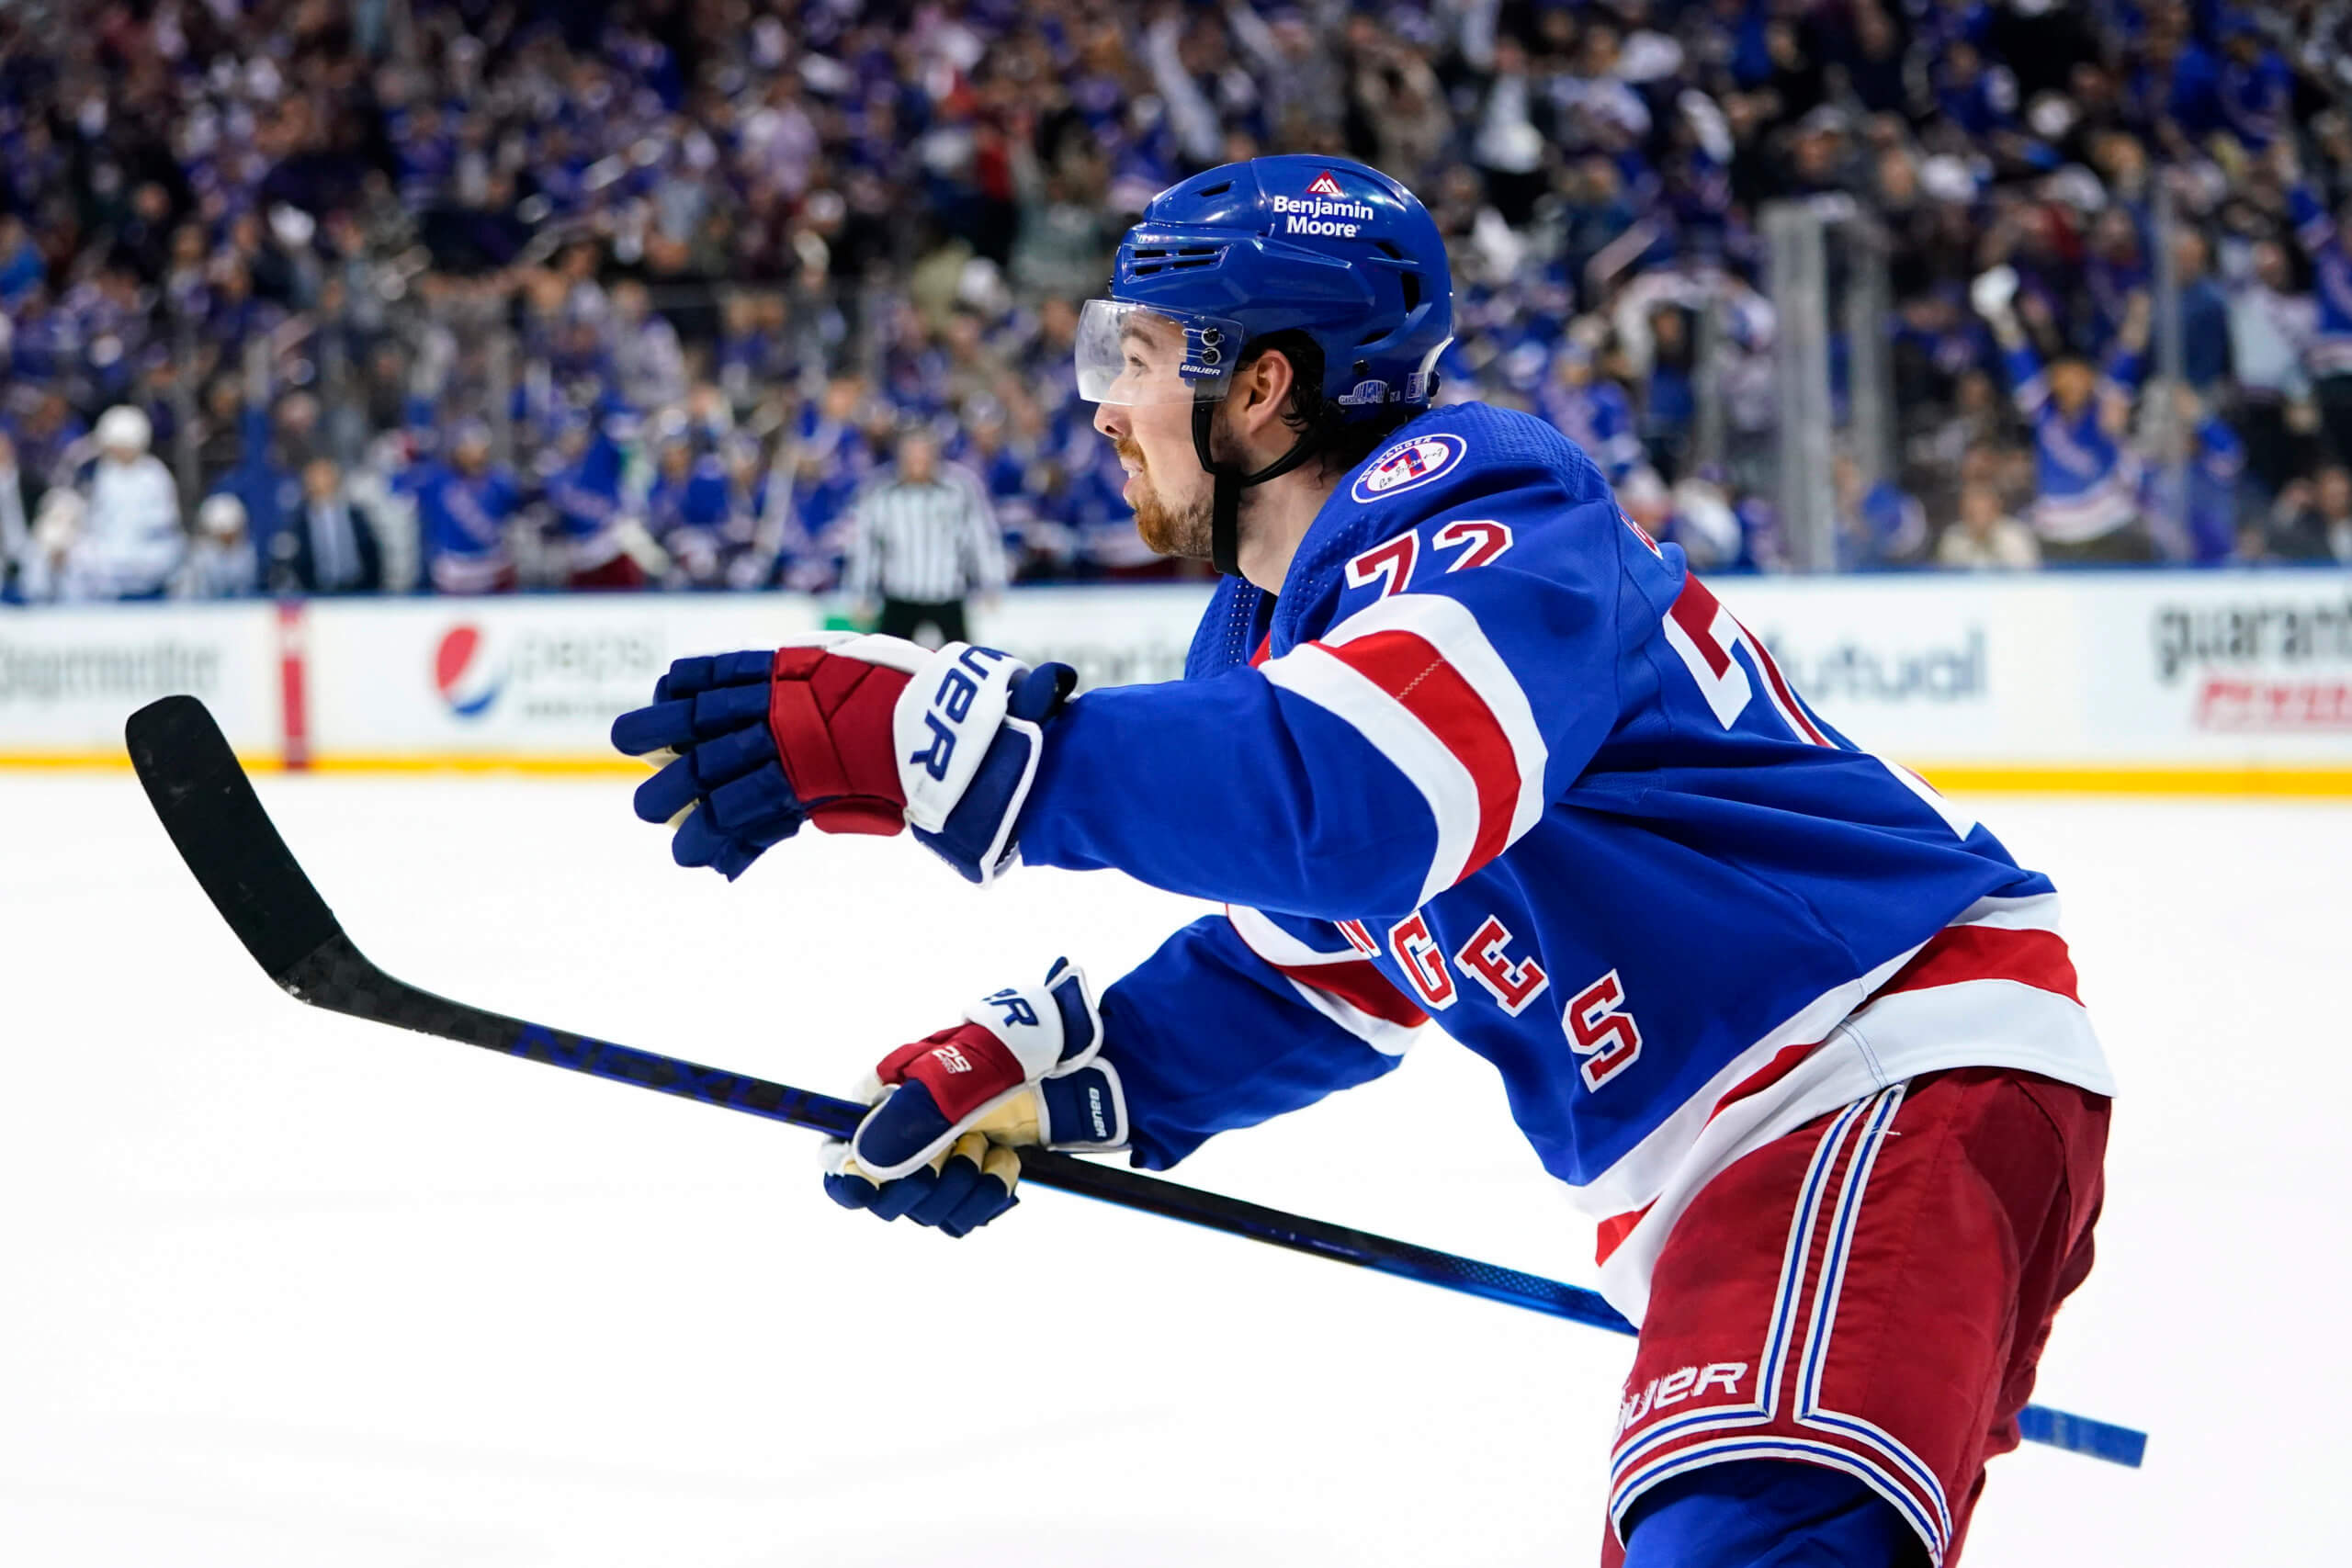 New York Rangers on X: It's #NYR game night @TheGarden! Be there